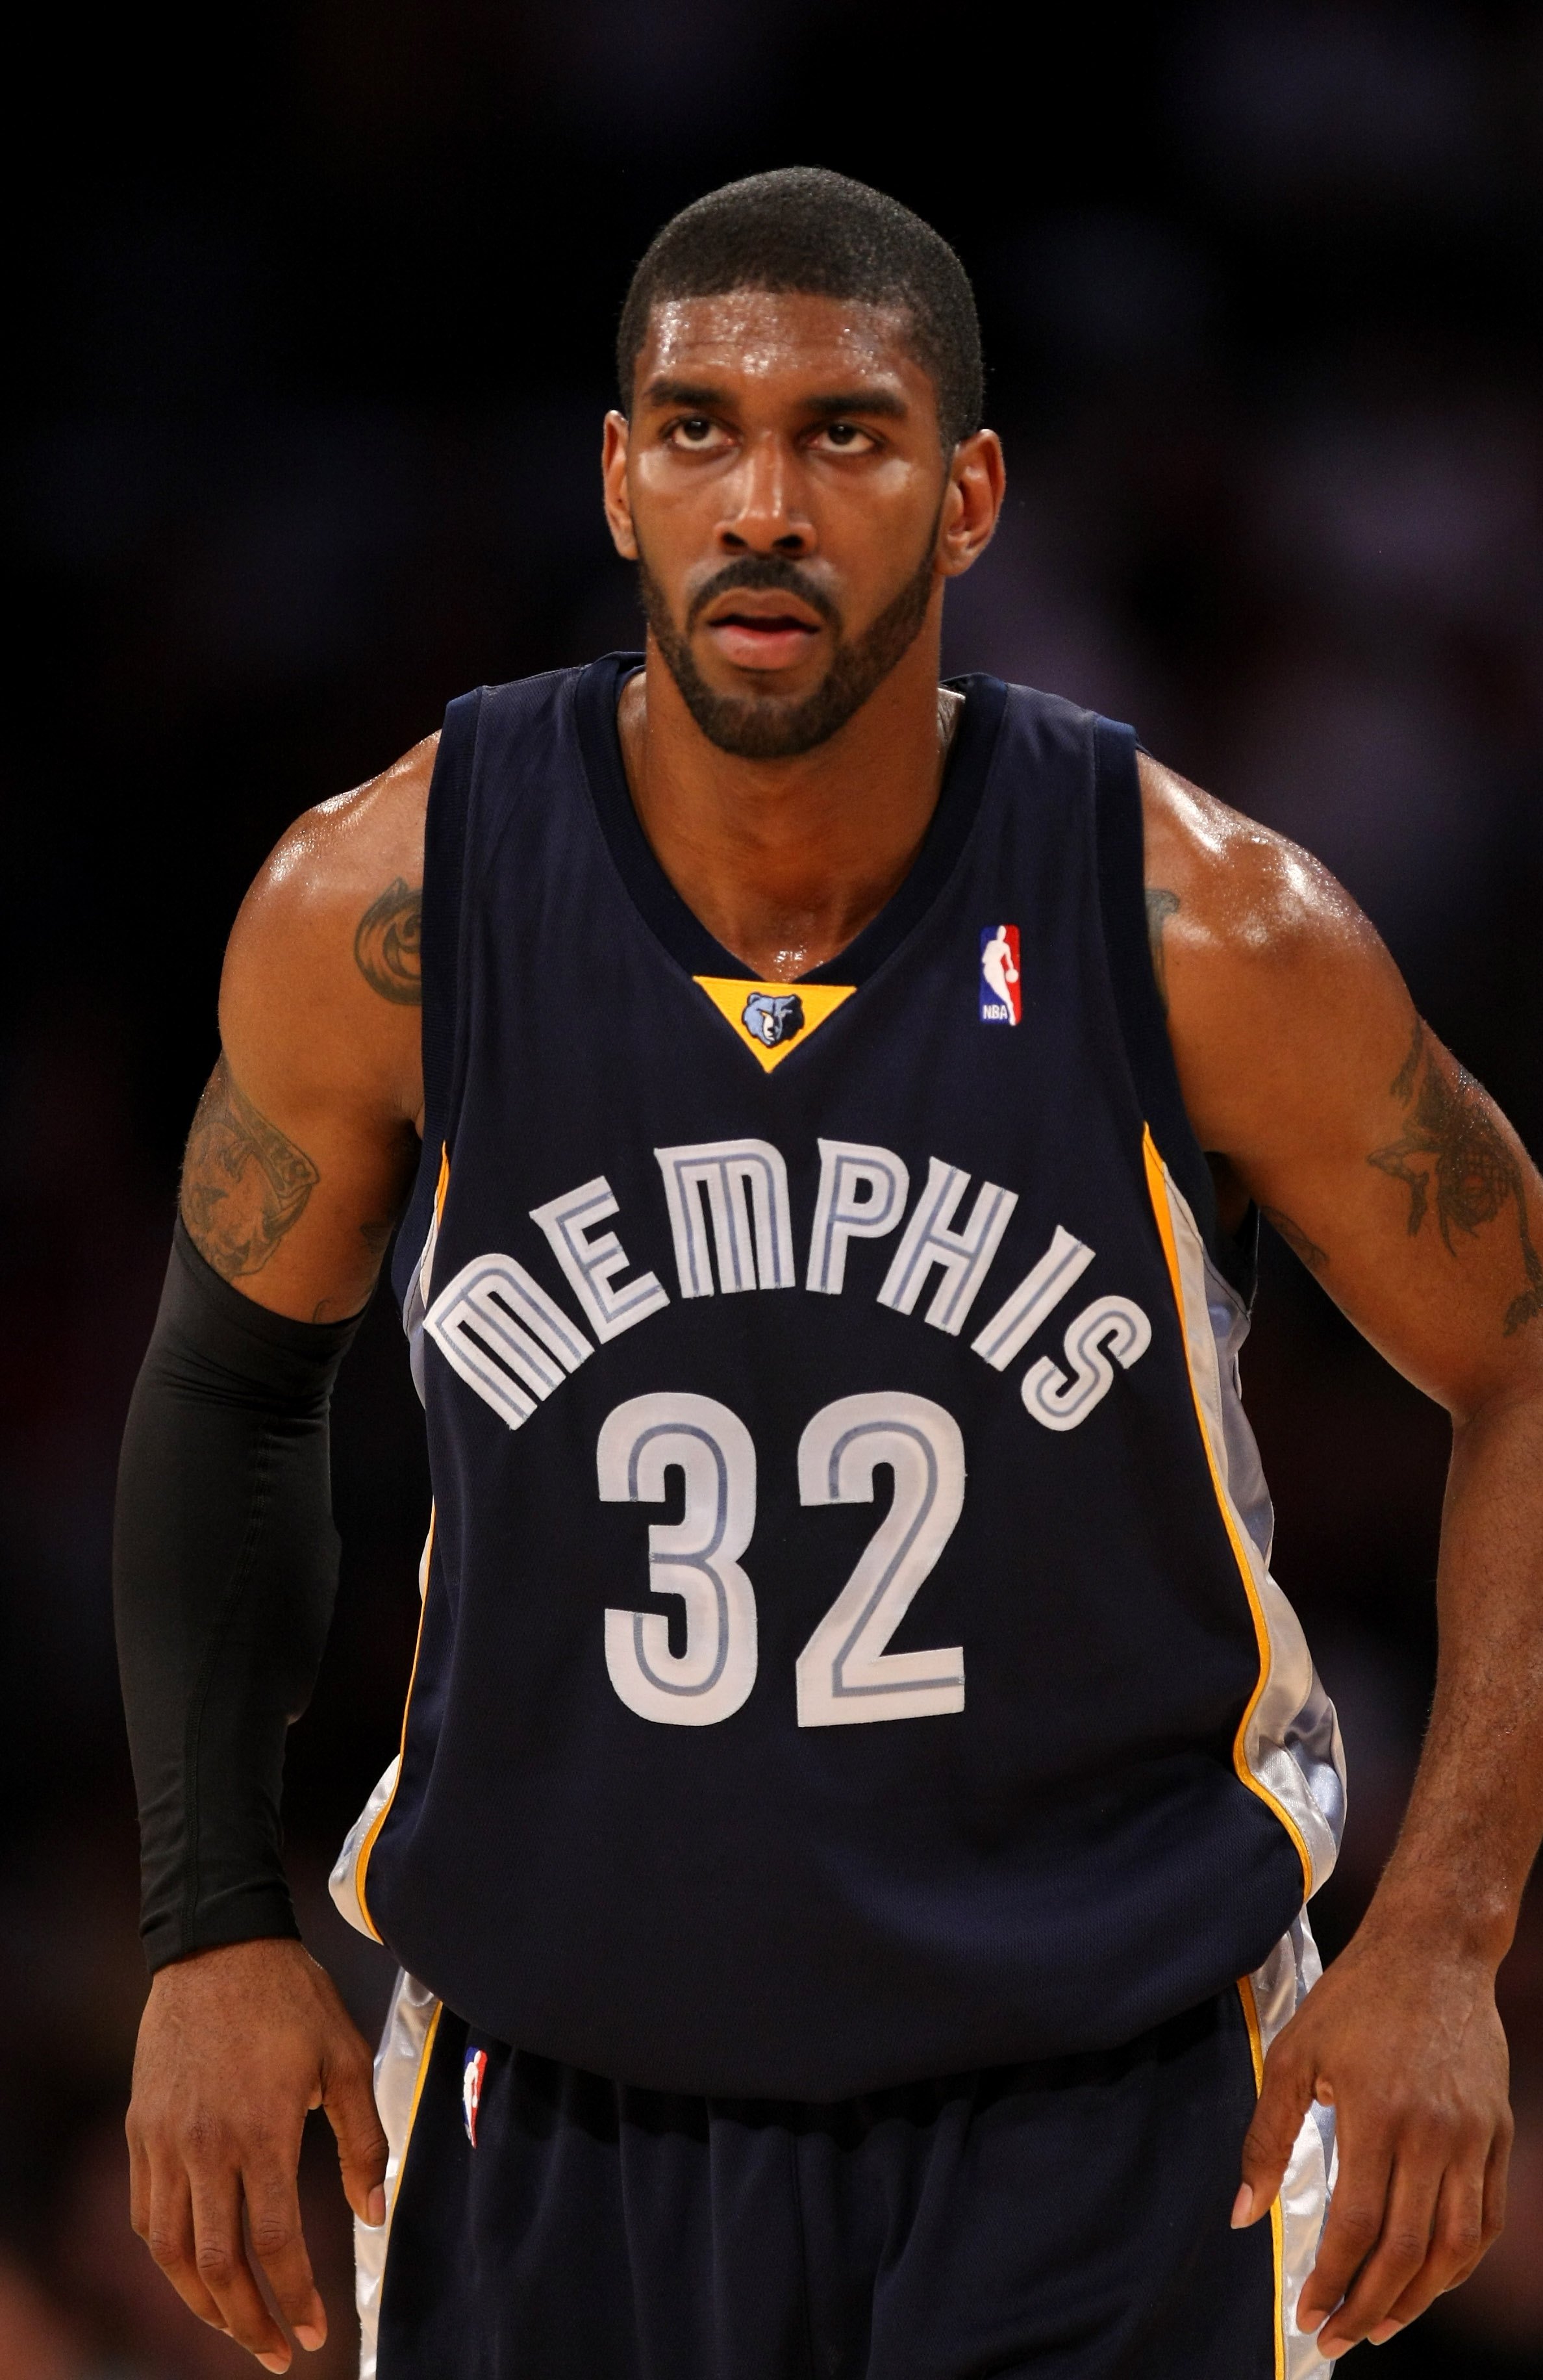 LOS ANGELES - APRIL 12:  O.J. Mayo #32 of the Memphis Grizzlies sets on the court aganst the Los Angeles Lakers on April 12, 2009 at Staples Center in Los Angeles, California.   NOTE TO USER: User expressly acknowledges and agrees that, by downloading and